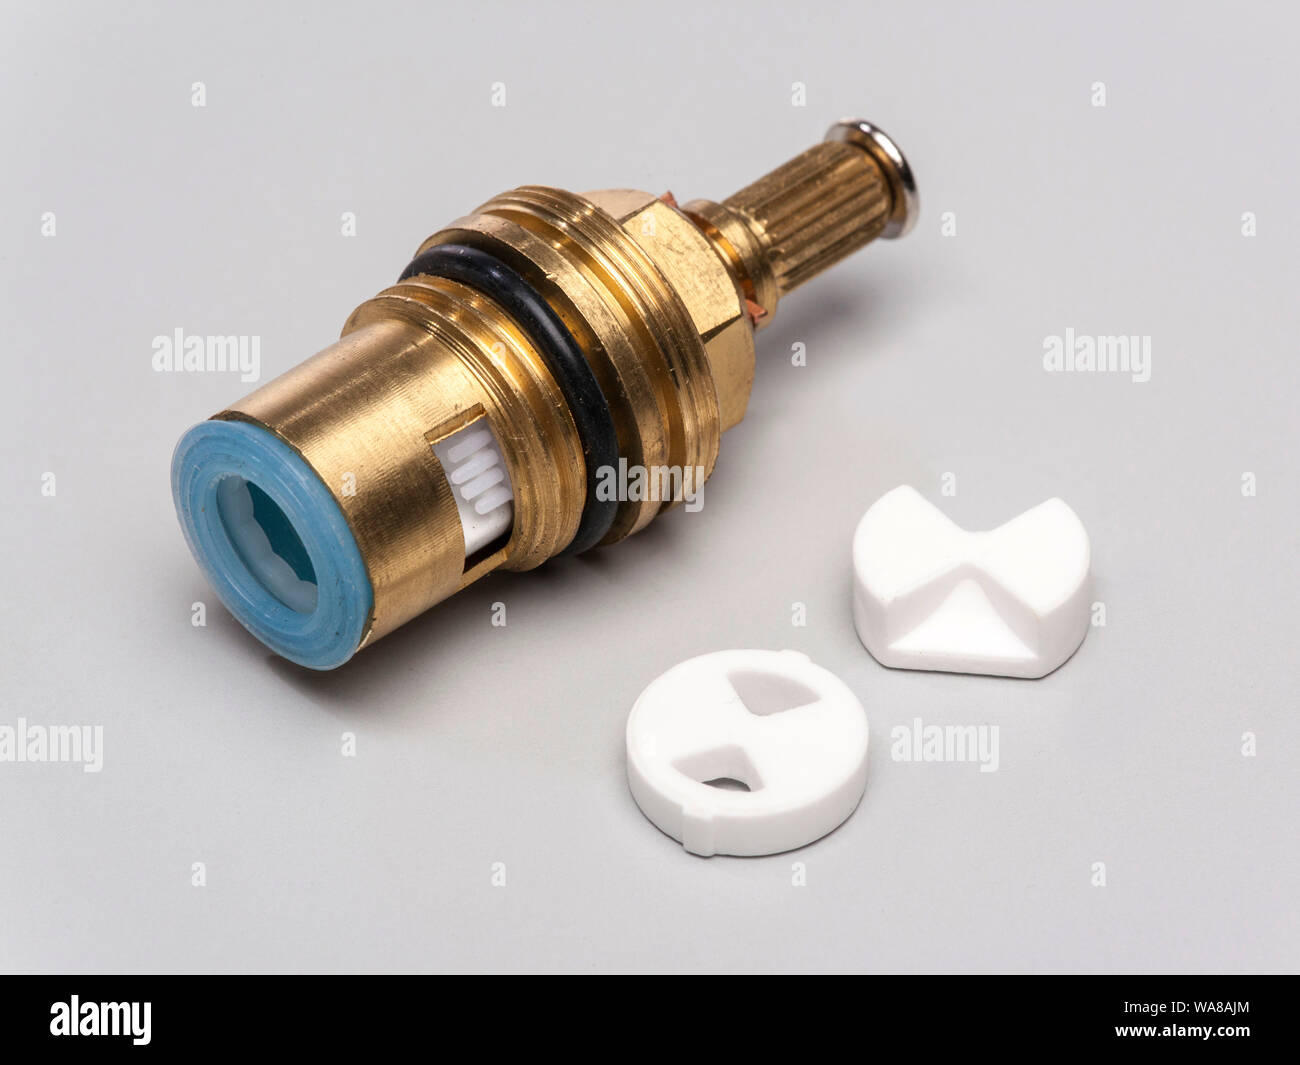 ceramic tap/faucet gland washers Stock Photo